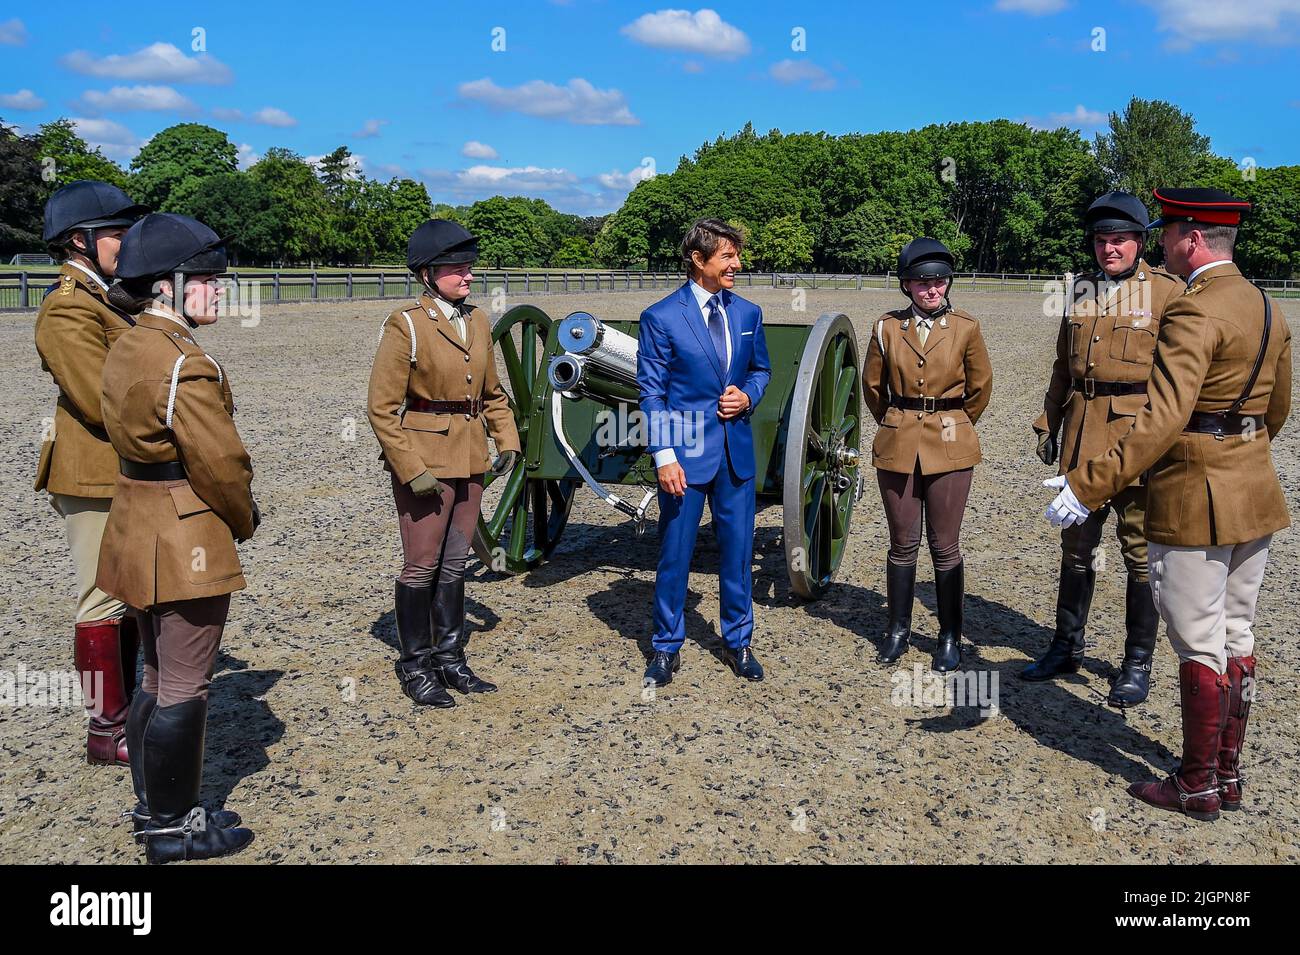 Windsor Castle, Windsor, Berkshire, UK. 8th July 2022. EMBARGOED UNTIL 12th JULY  Tom Cruise meeting members of the King's Troop Royal Horse Artillery, who he introduced during the Platinum Jubilee Celebration back in May, on a private visit in the Private Grounds of Windsor Castle   Credit:Peter Nixon/Alamy Live News Stock Photo